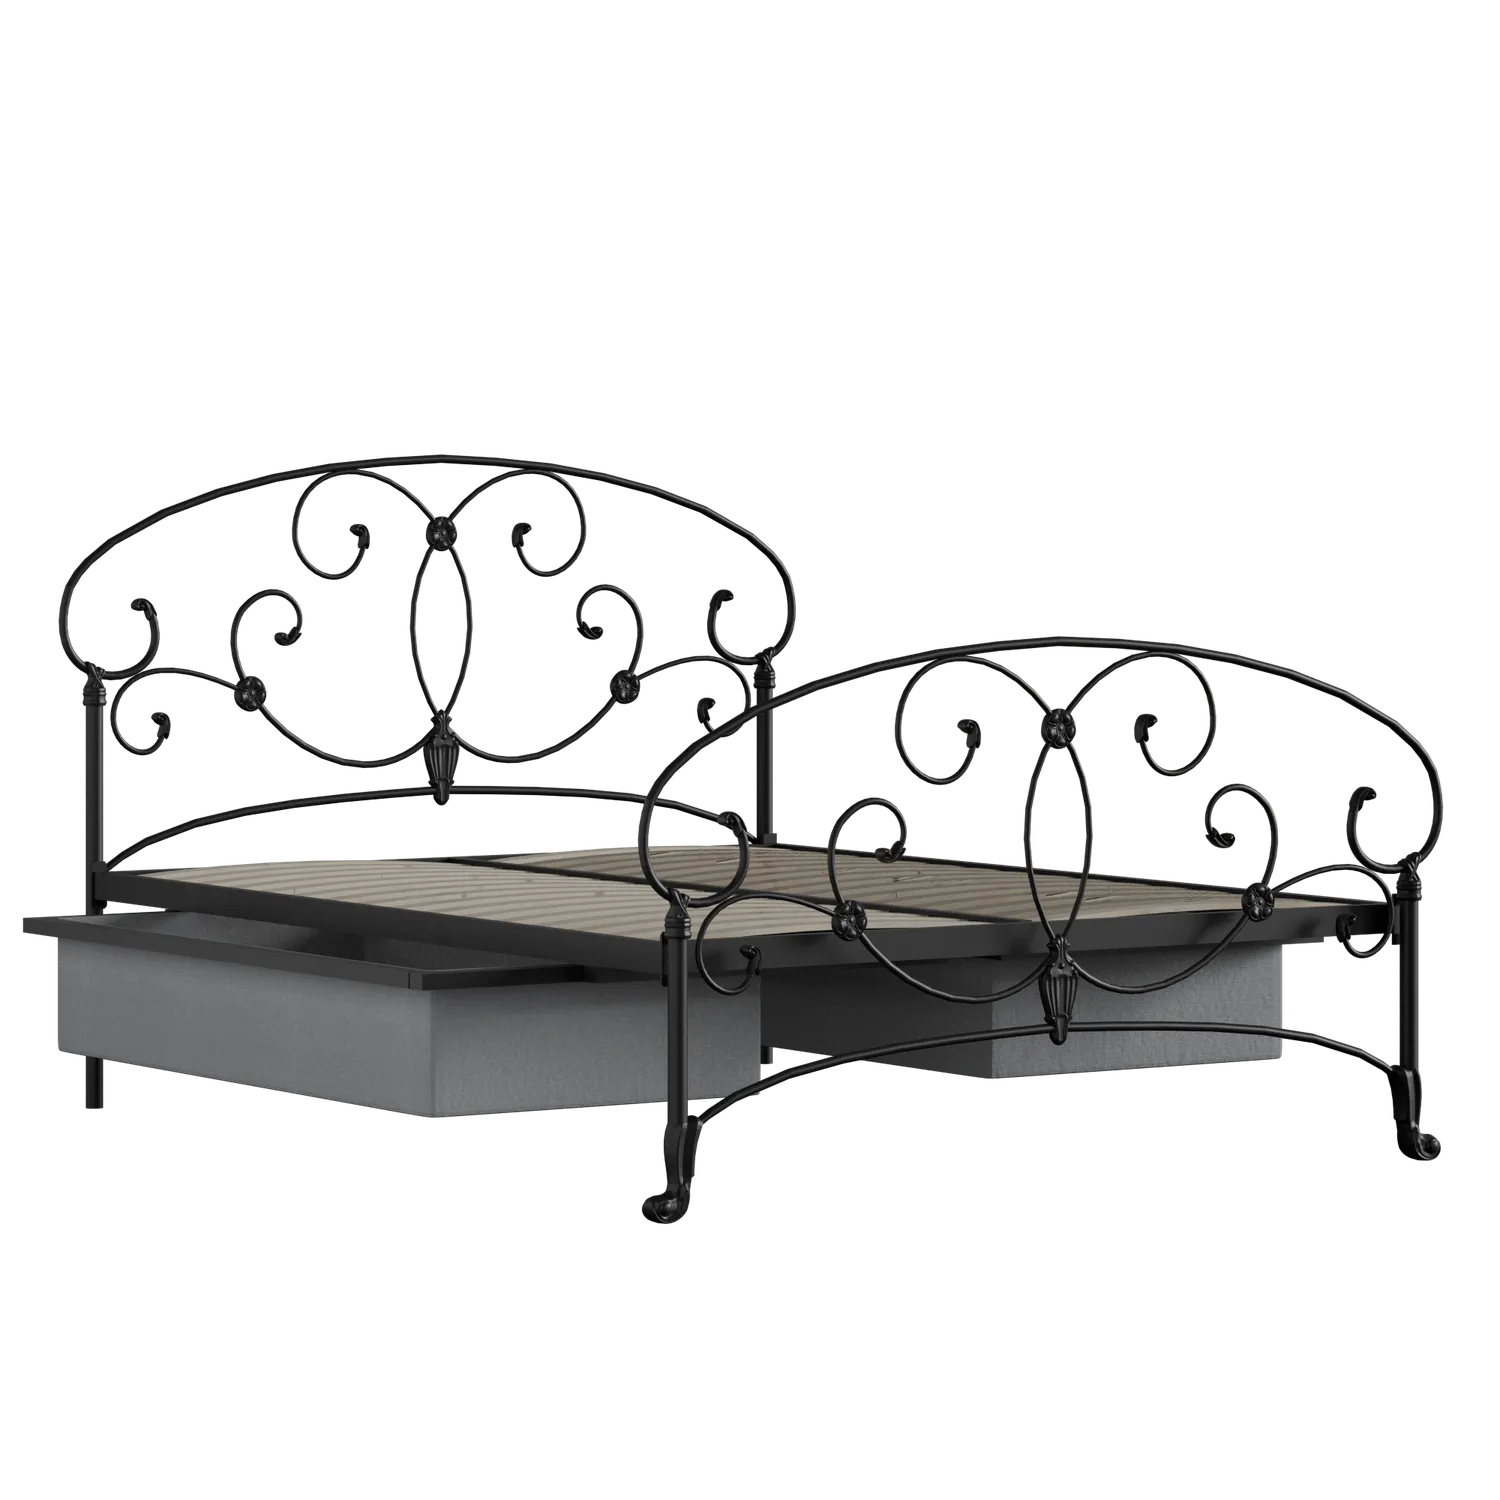 Arigna iron/metal bed in black with drawers